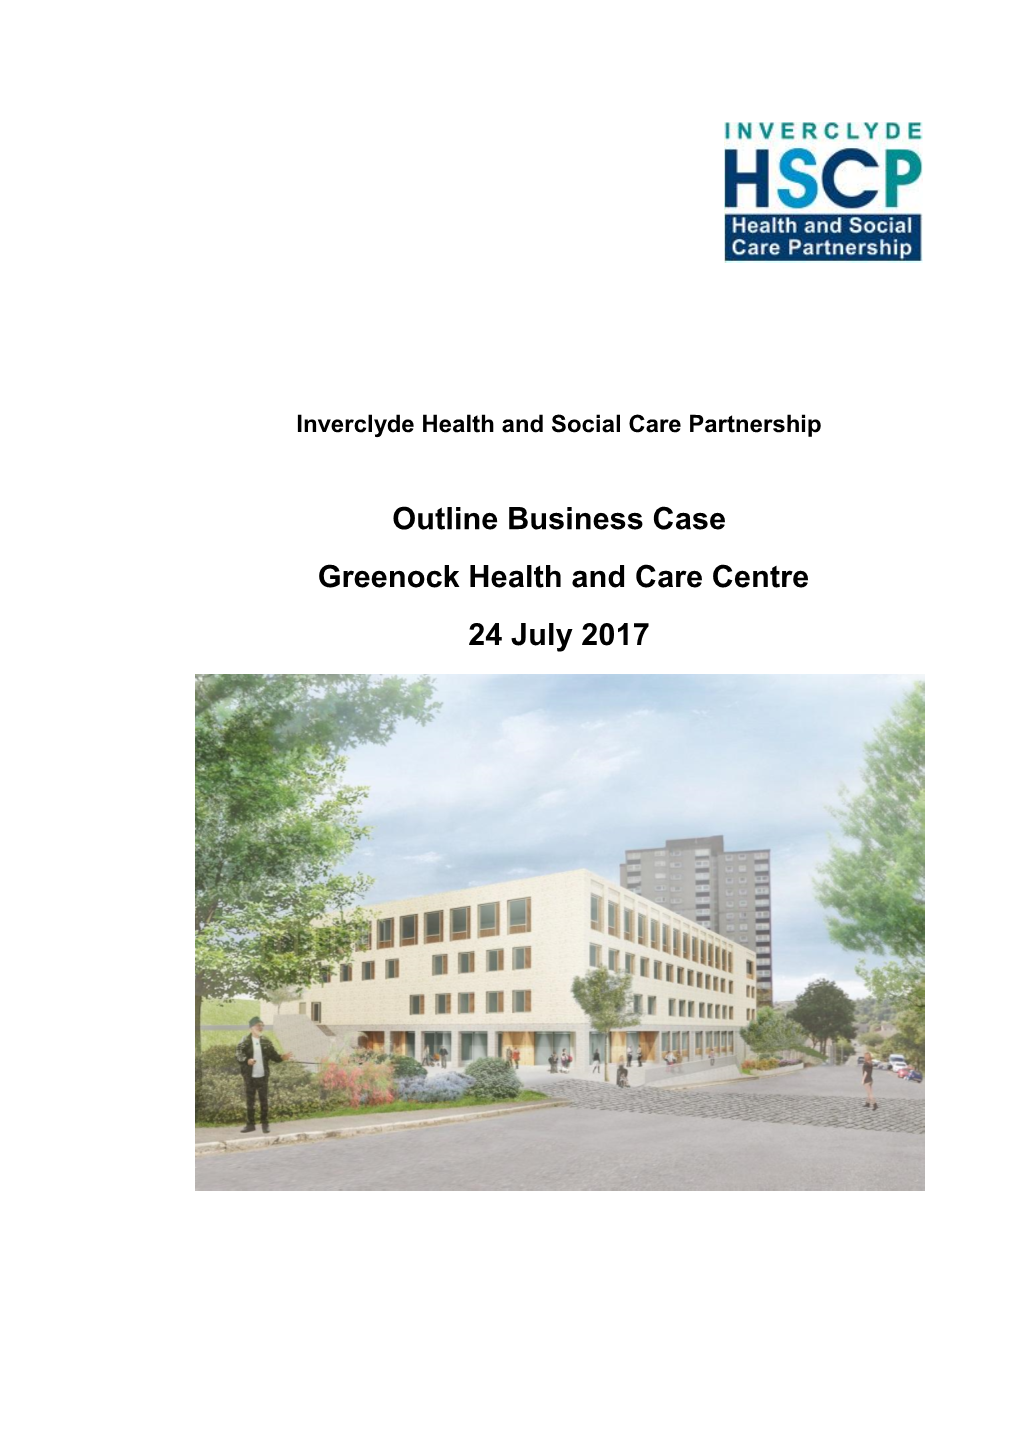 Outline Business Case Greenock Health and Care Centre 24 July 2017